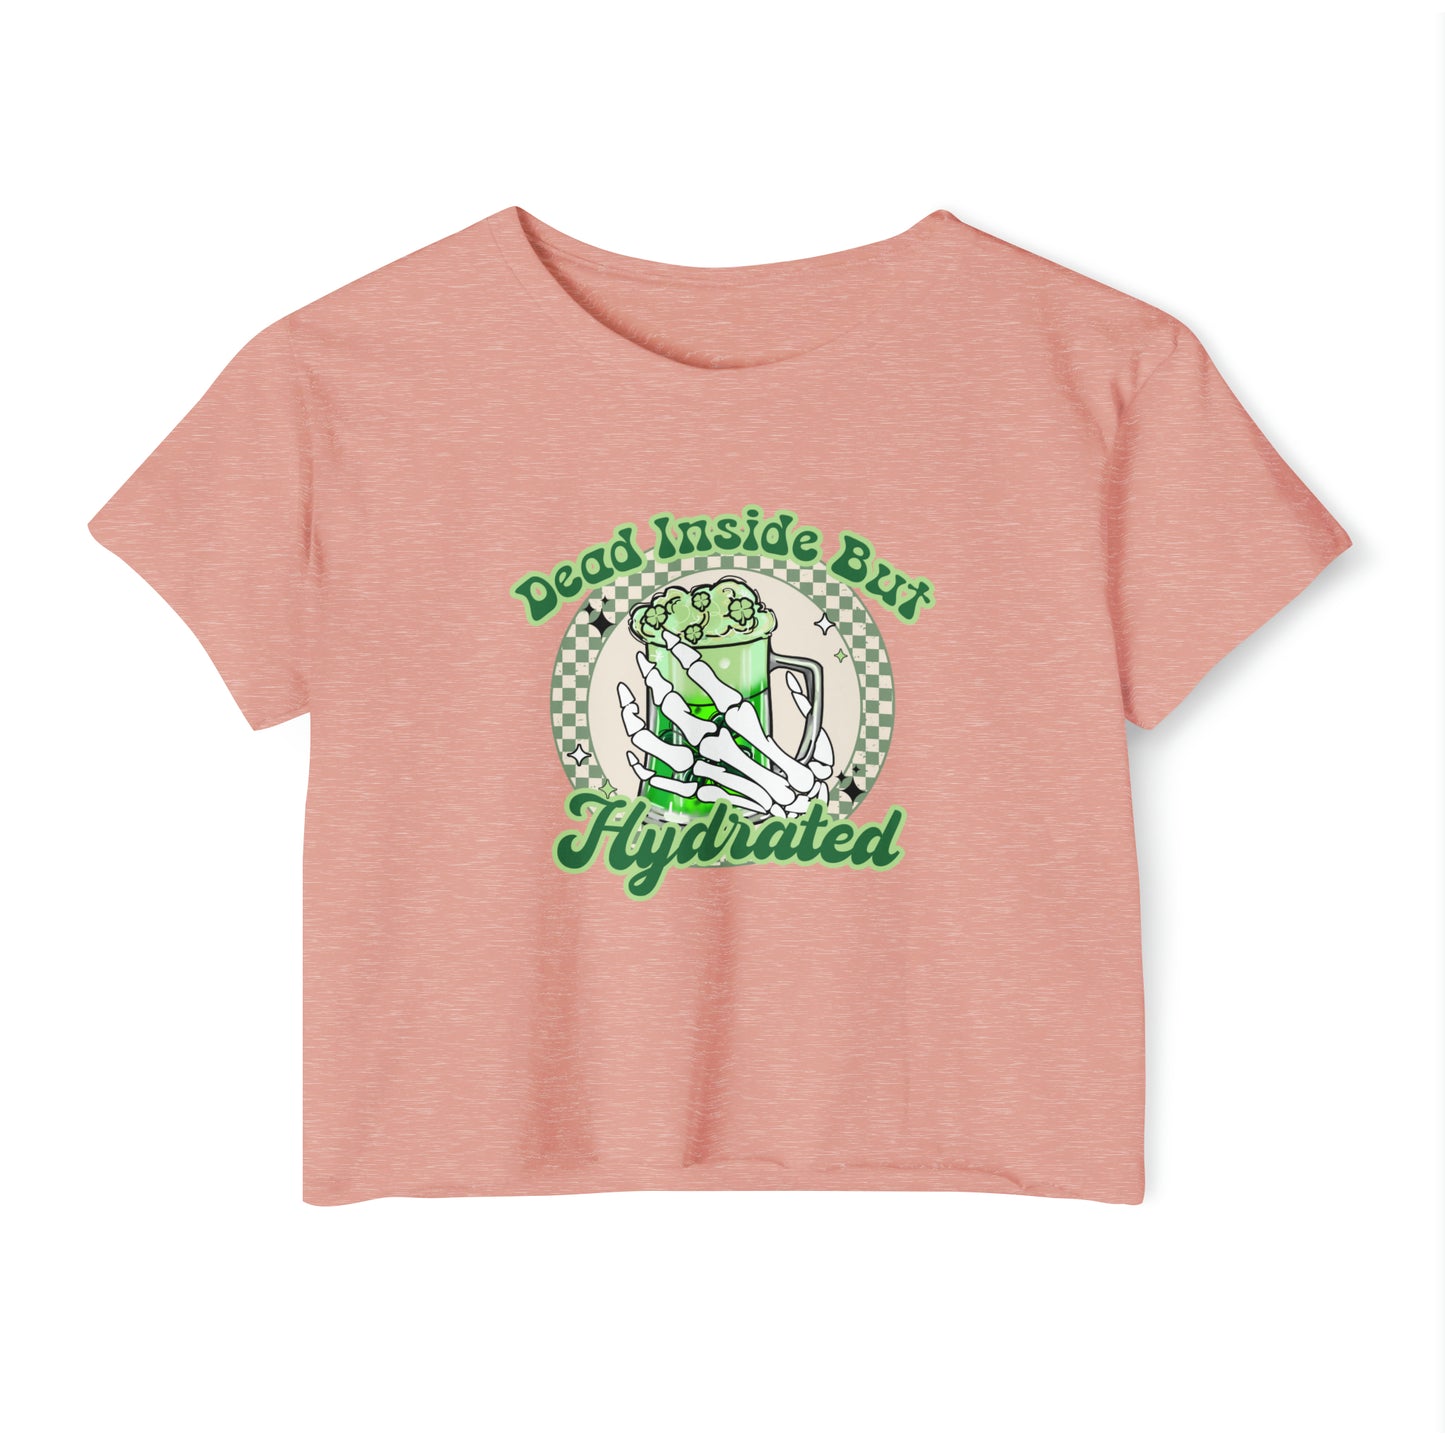 St. Patrick's Day Crop Top, Irish Baby Tee, Hydrated T-Shirt, St Paddy's Day Drinking Top, St Patricks Day Shirt For women